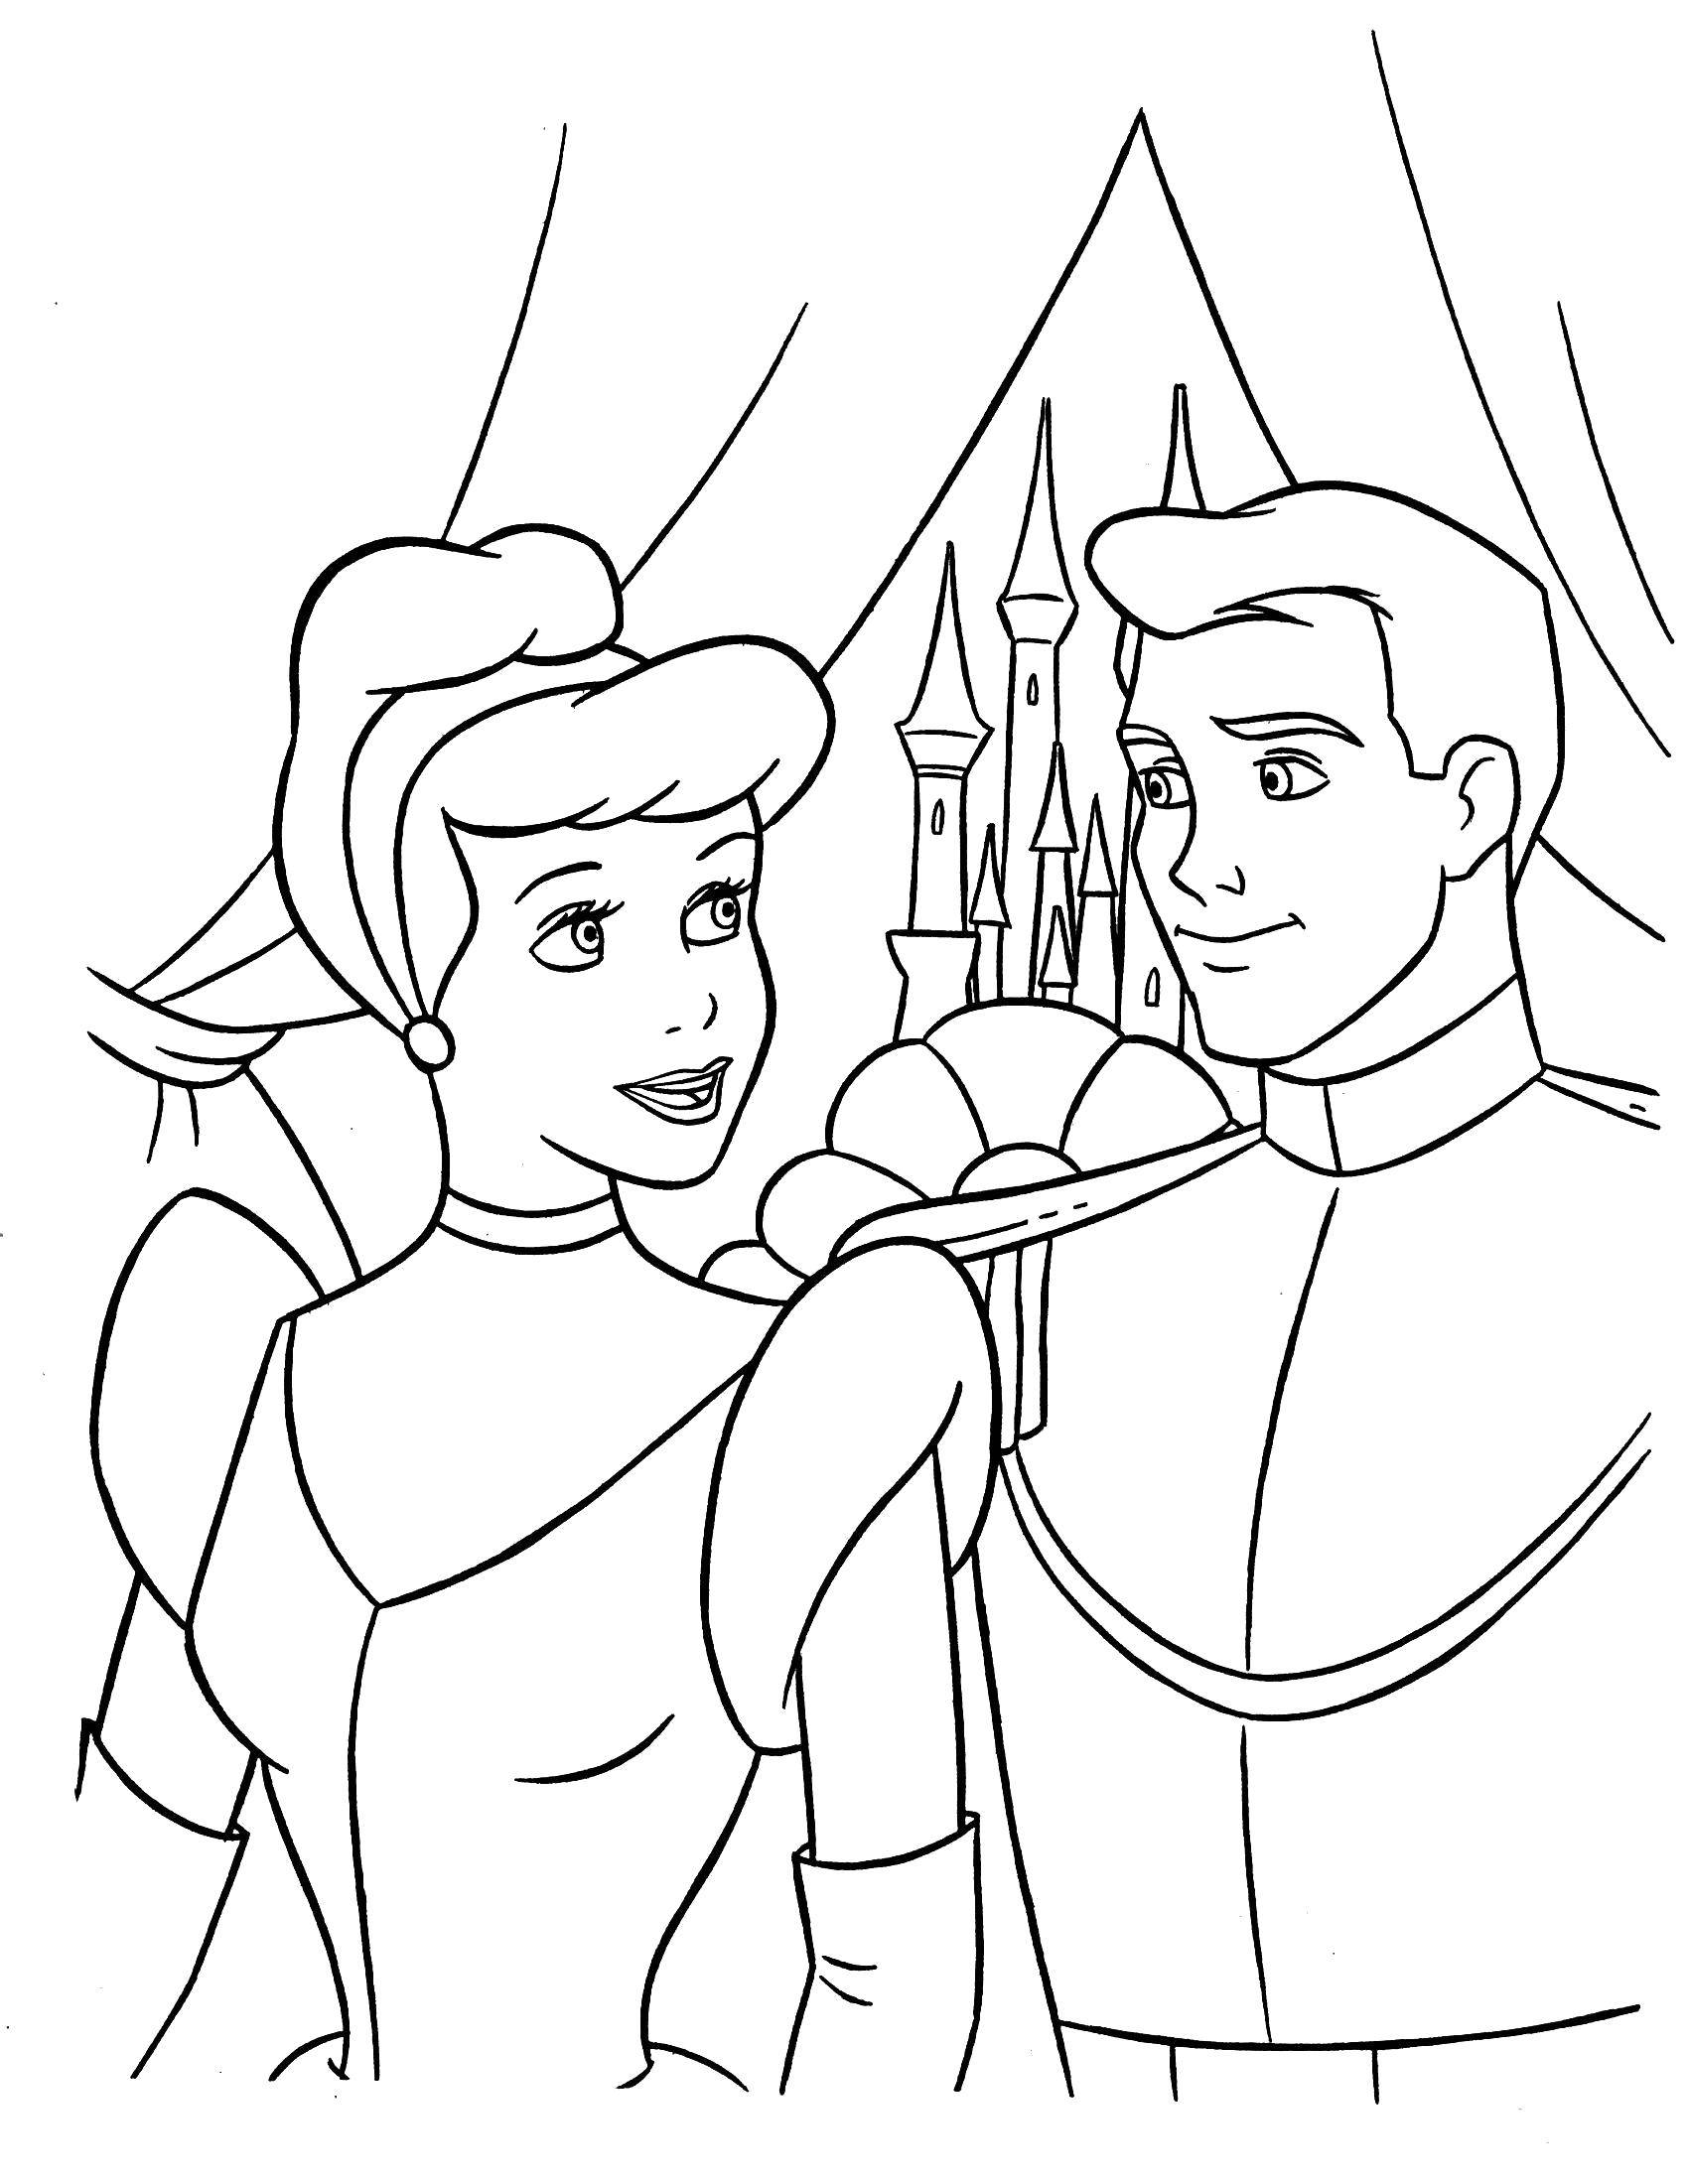 Coloring Cinderella and her Prince. Category Disney coloring pages. Tags:  Disney, Cinderella.